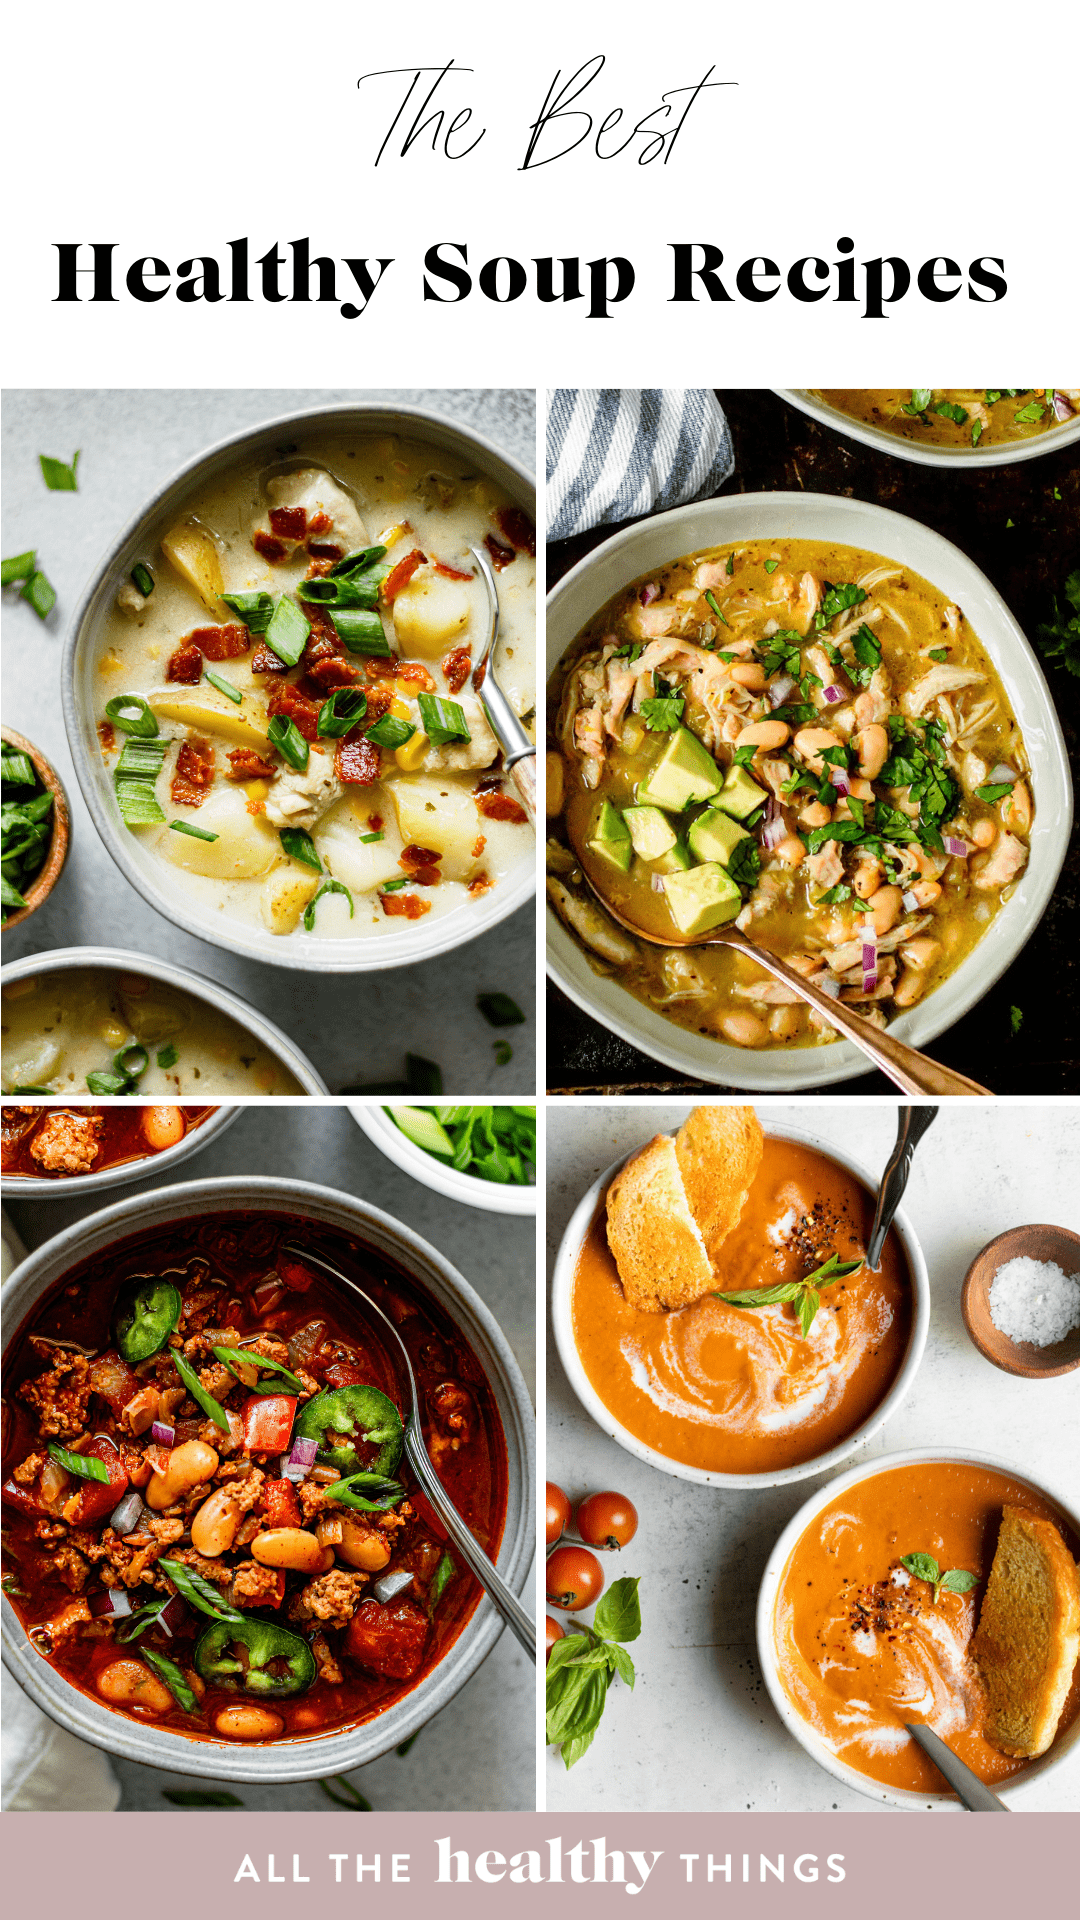 The Best Healthy Soup Recipes - All the Healthy Things